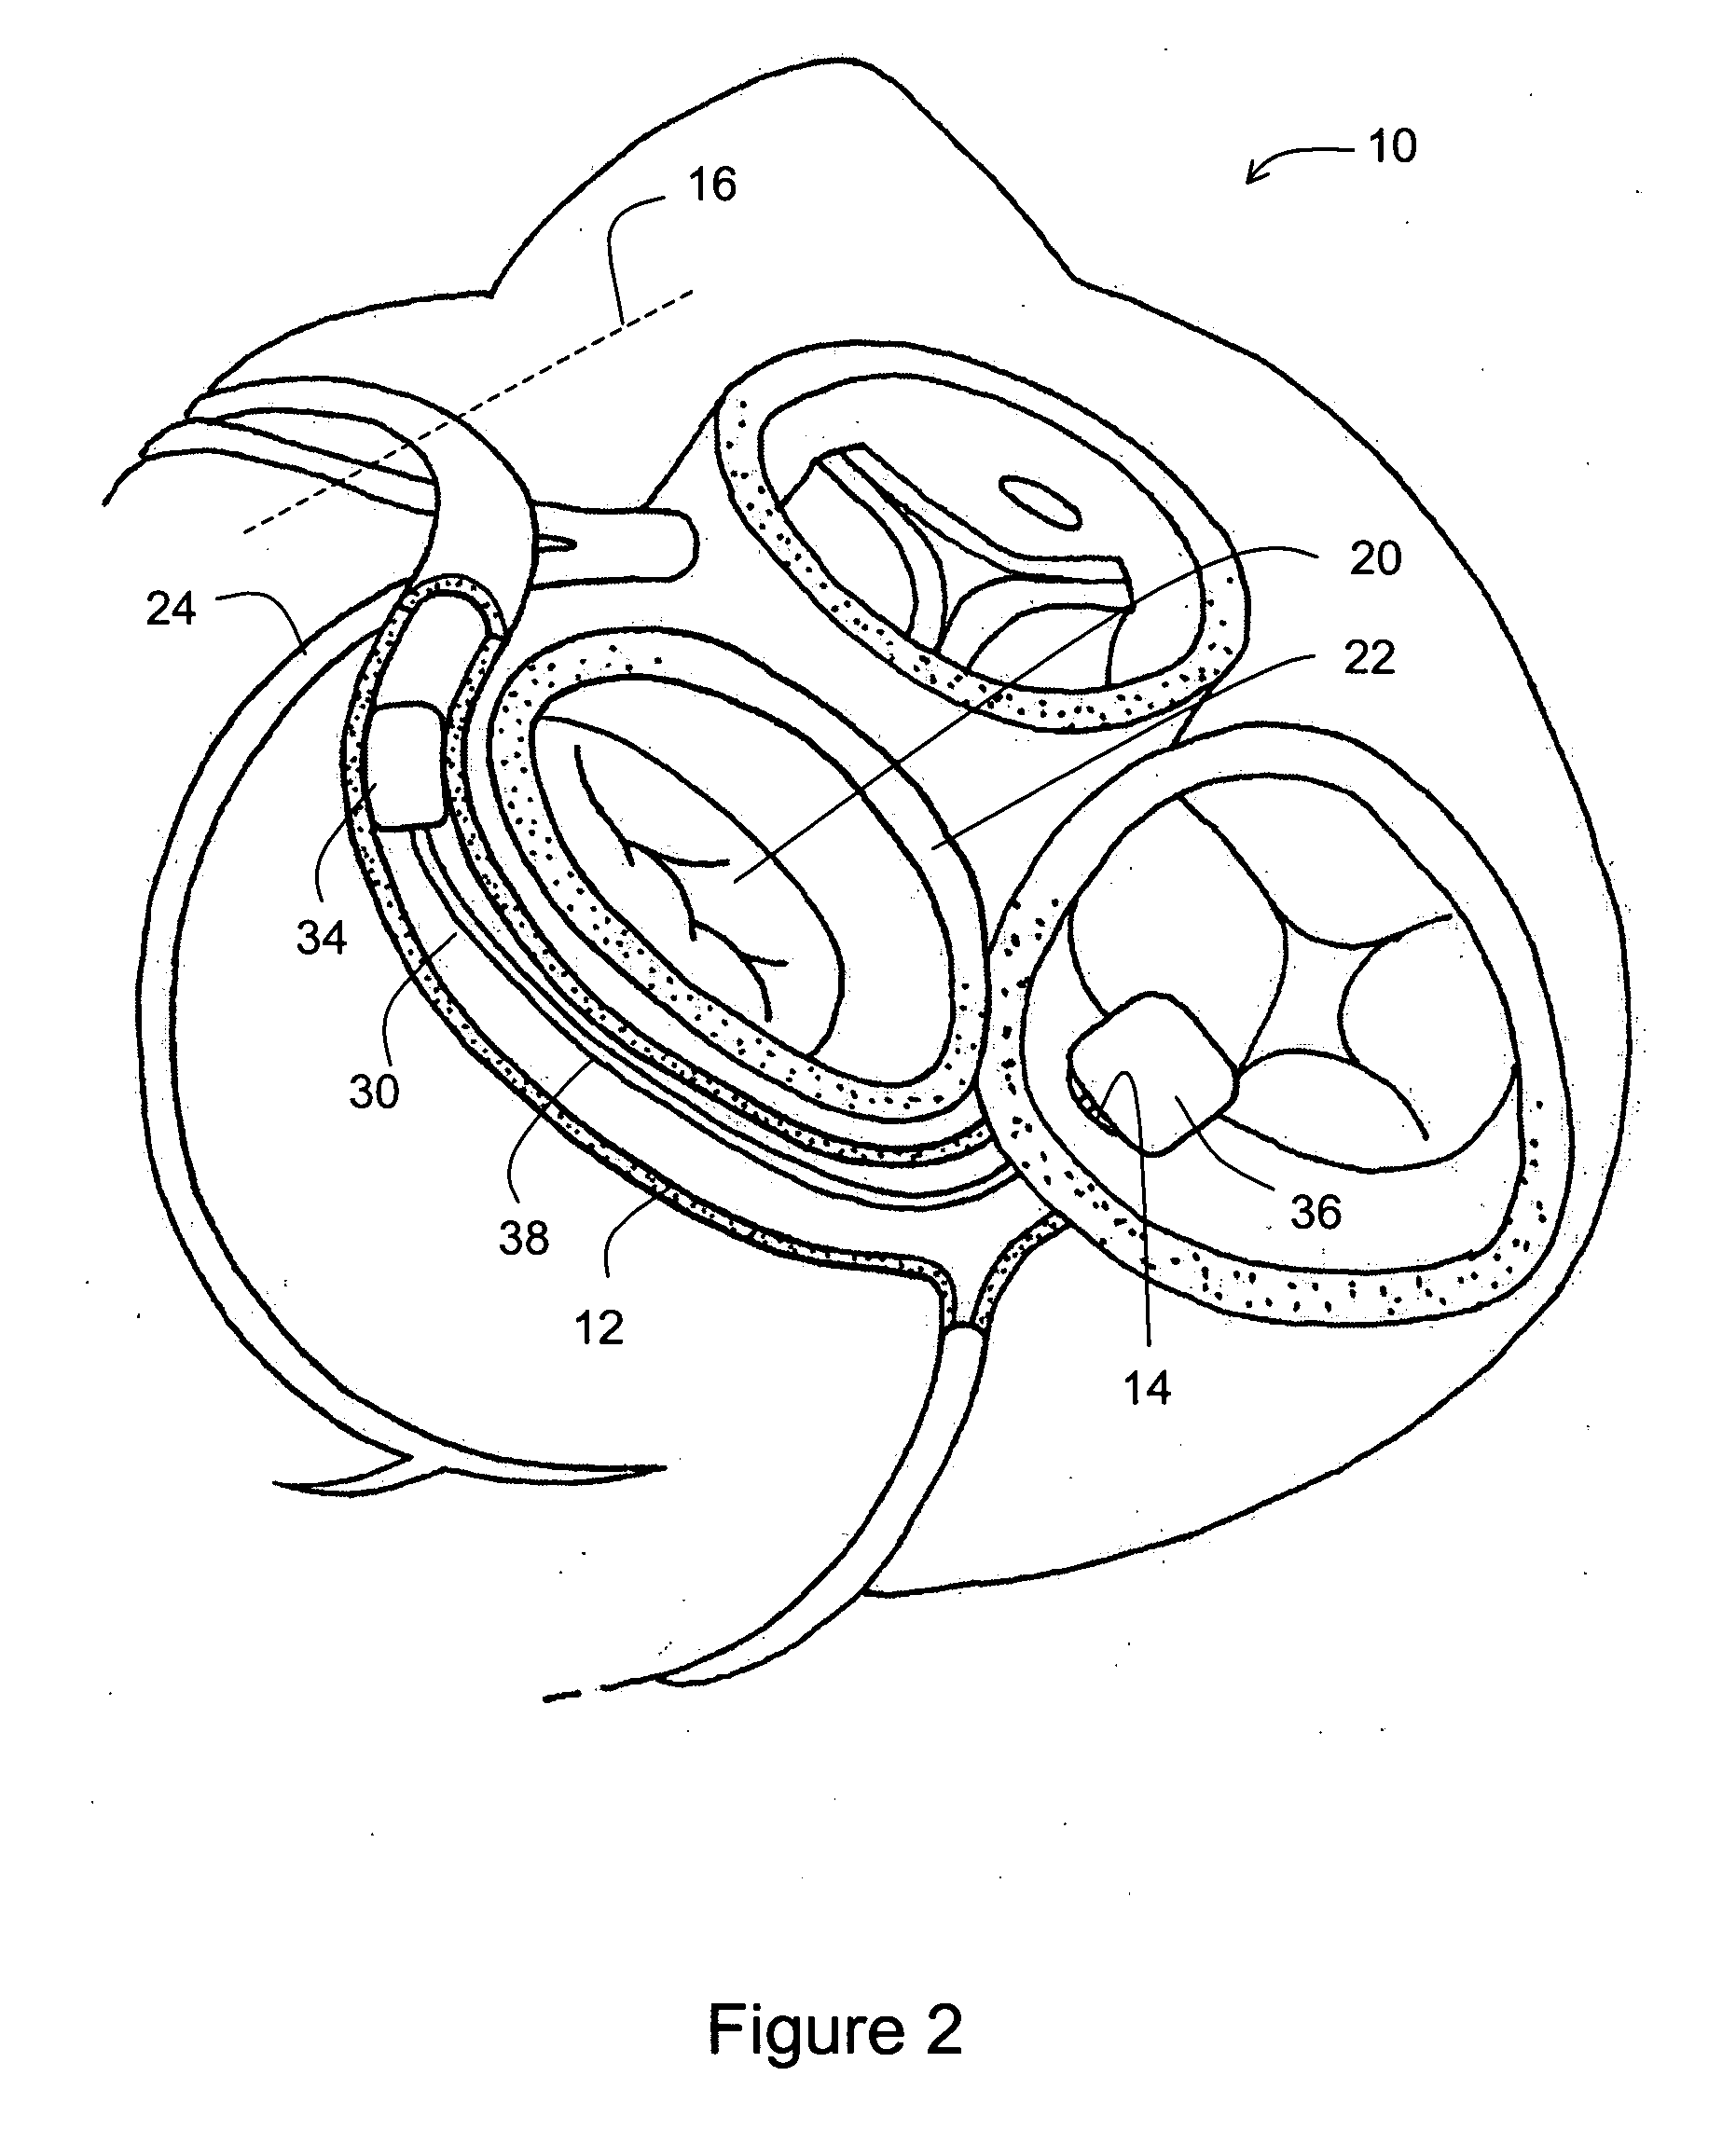 Tapered connector for tissue shaping device